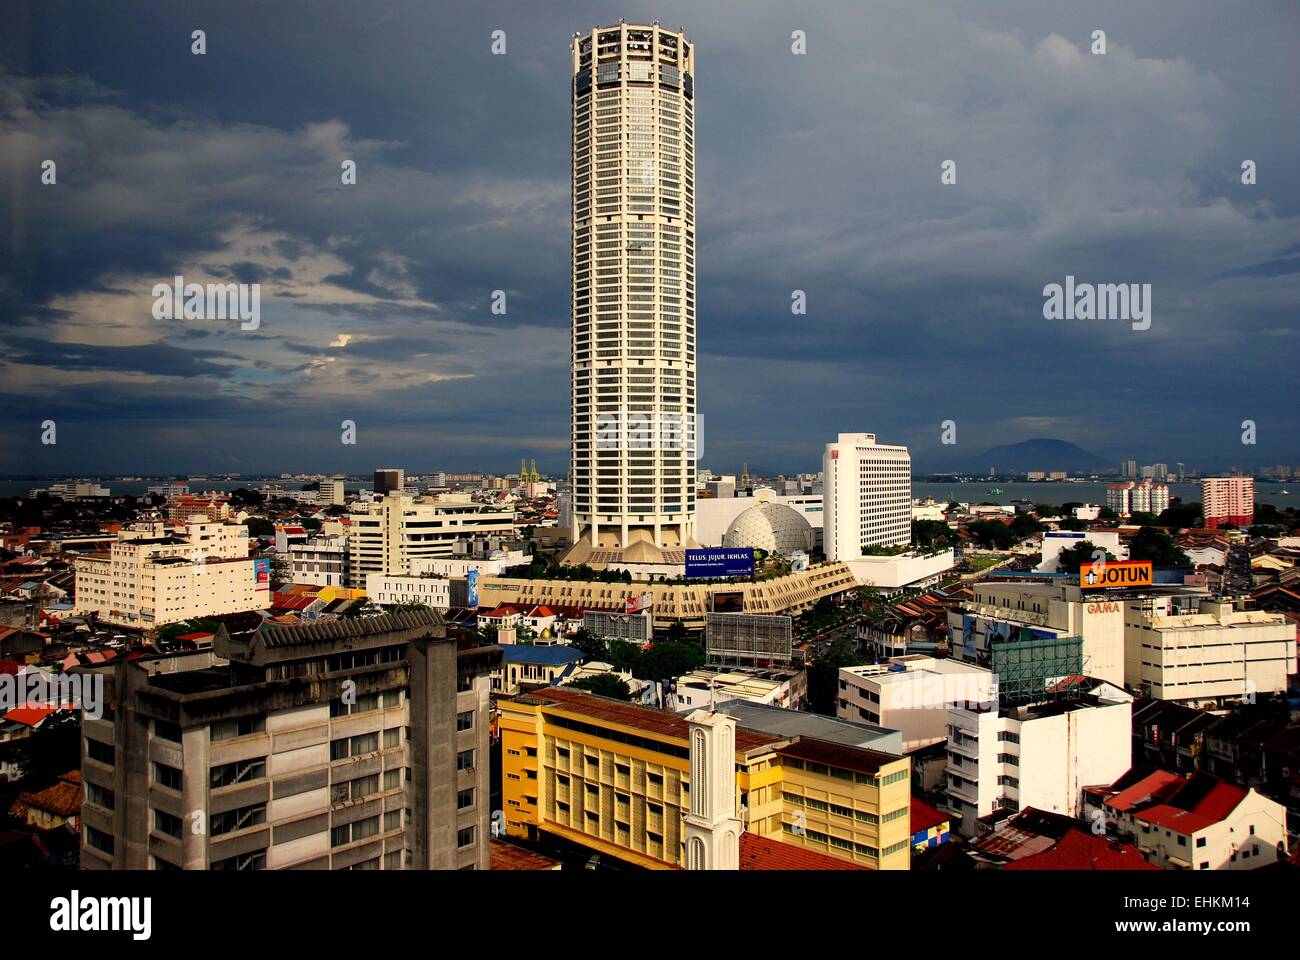 Georgetown, Malaysia:  66-story Komtar Tower dominates the skyline of the city  * Stock Photo